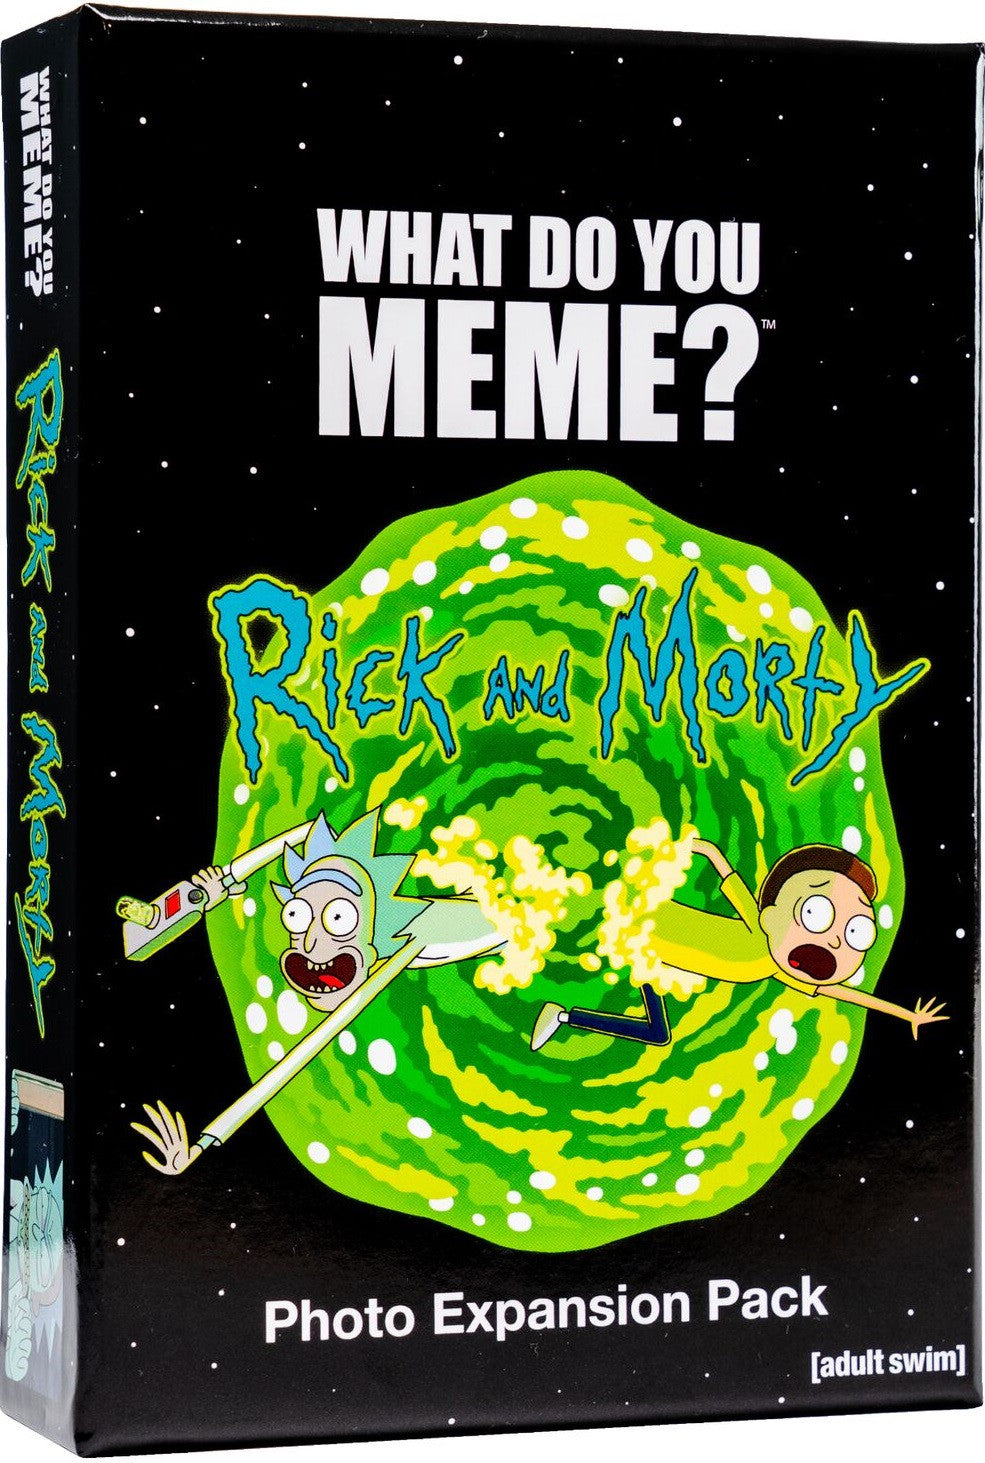 What Do You Meme? Rick and Morty Expansion Pack 